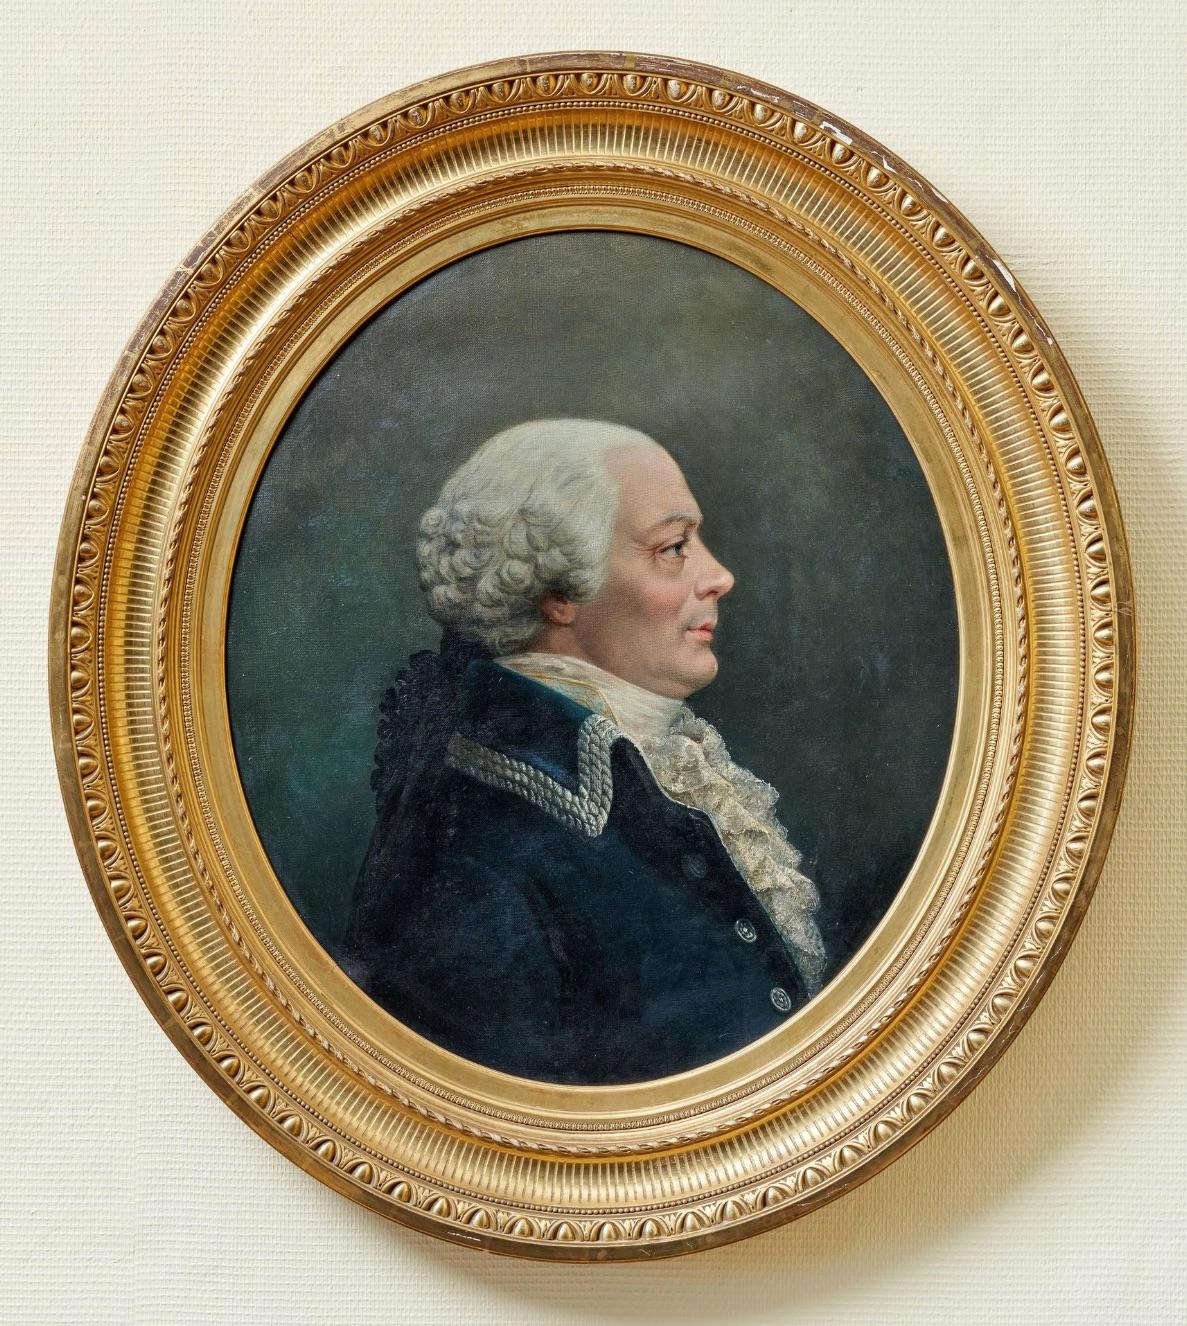 Unknown Portrait Painting - Count Constant Duval de Beaulieu (Leuze in 1751 and Mons in 1828)